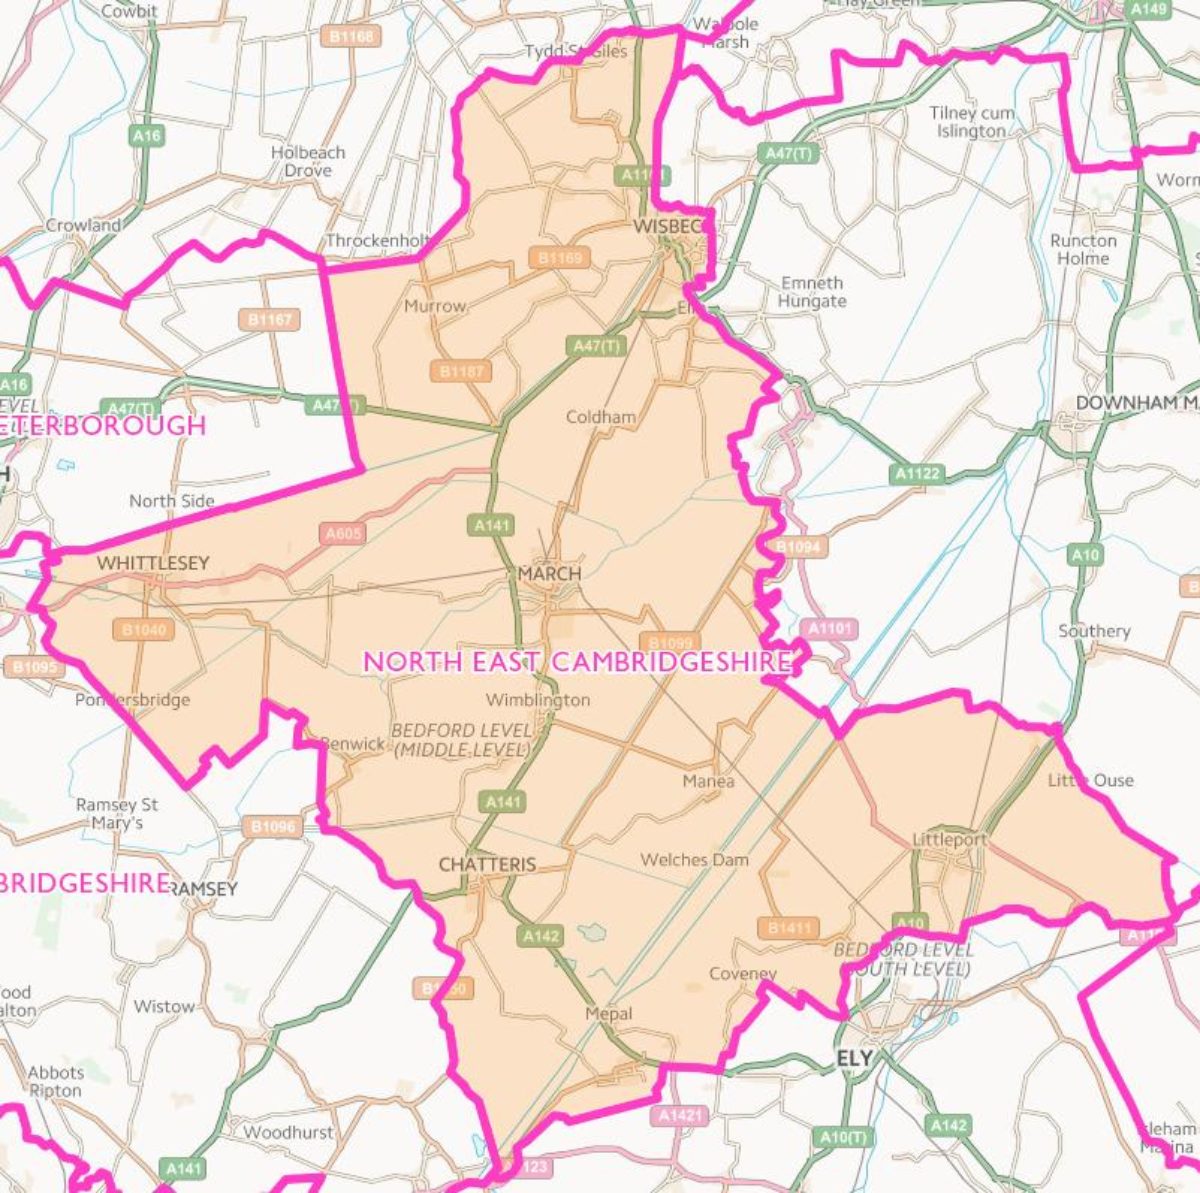 Map from OS, available here: https://www.ordnancesurvey.co.uk/election-maps/gb/?x=535720&y=296222&z=4&bnd1=WMC&bnd2=&labels=on -- Contains public sector information licensed under the Open Government Licence v3.0: http://www.nationalarchives.gov.uk/doc/open-government-licence/version/3/